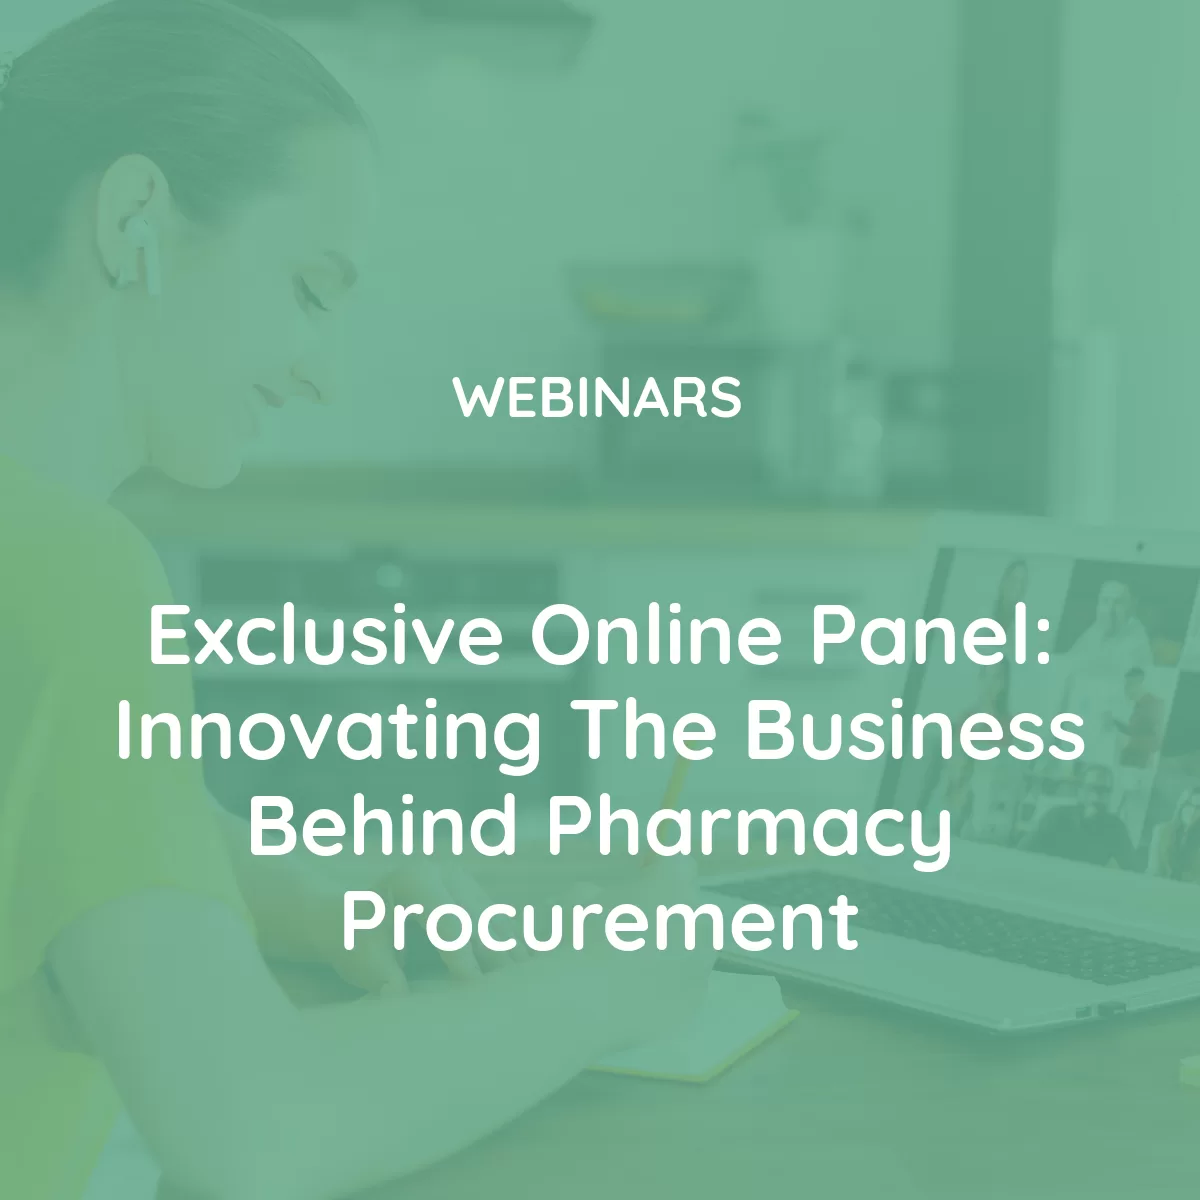 Exclusive Online Panel: Innovating the Business Behind Pharmacy Procurement